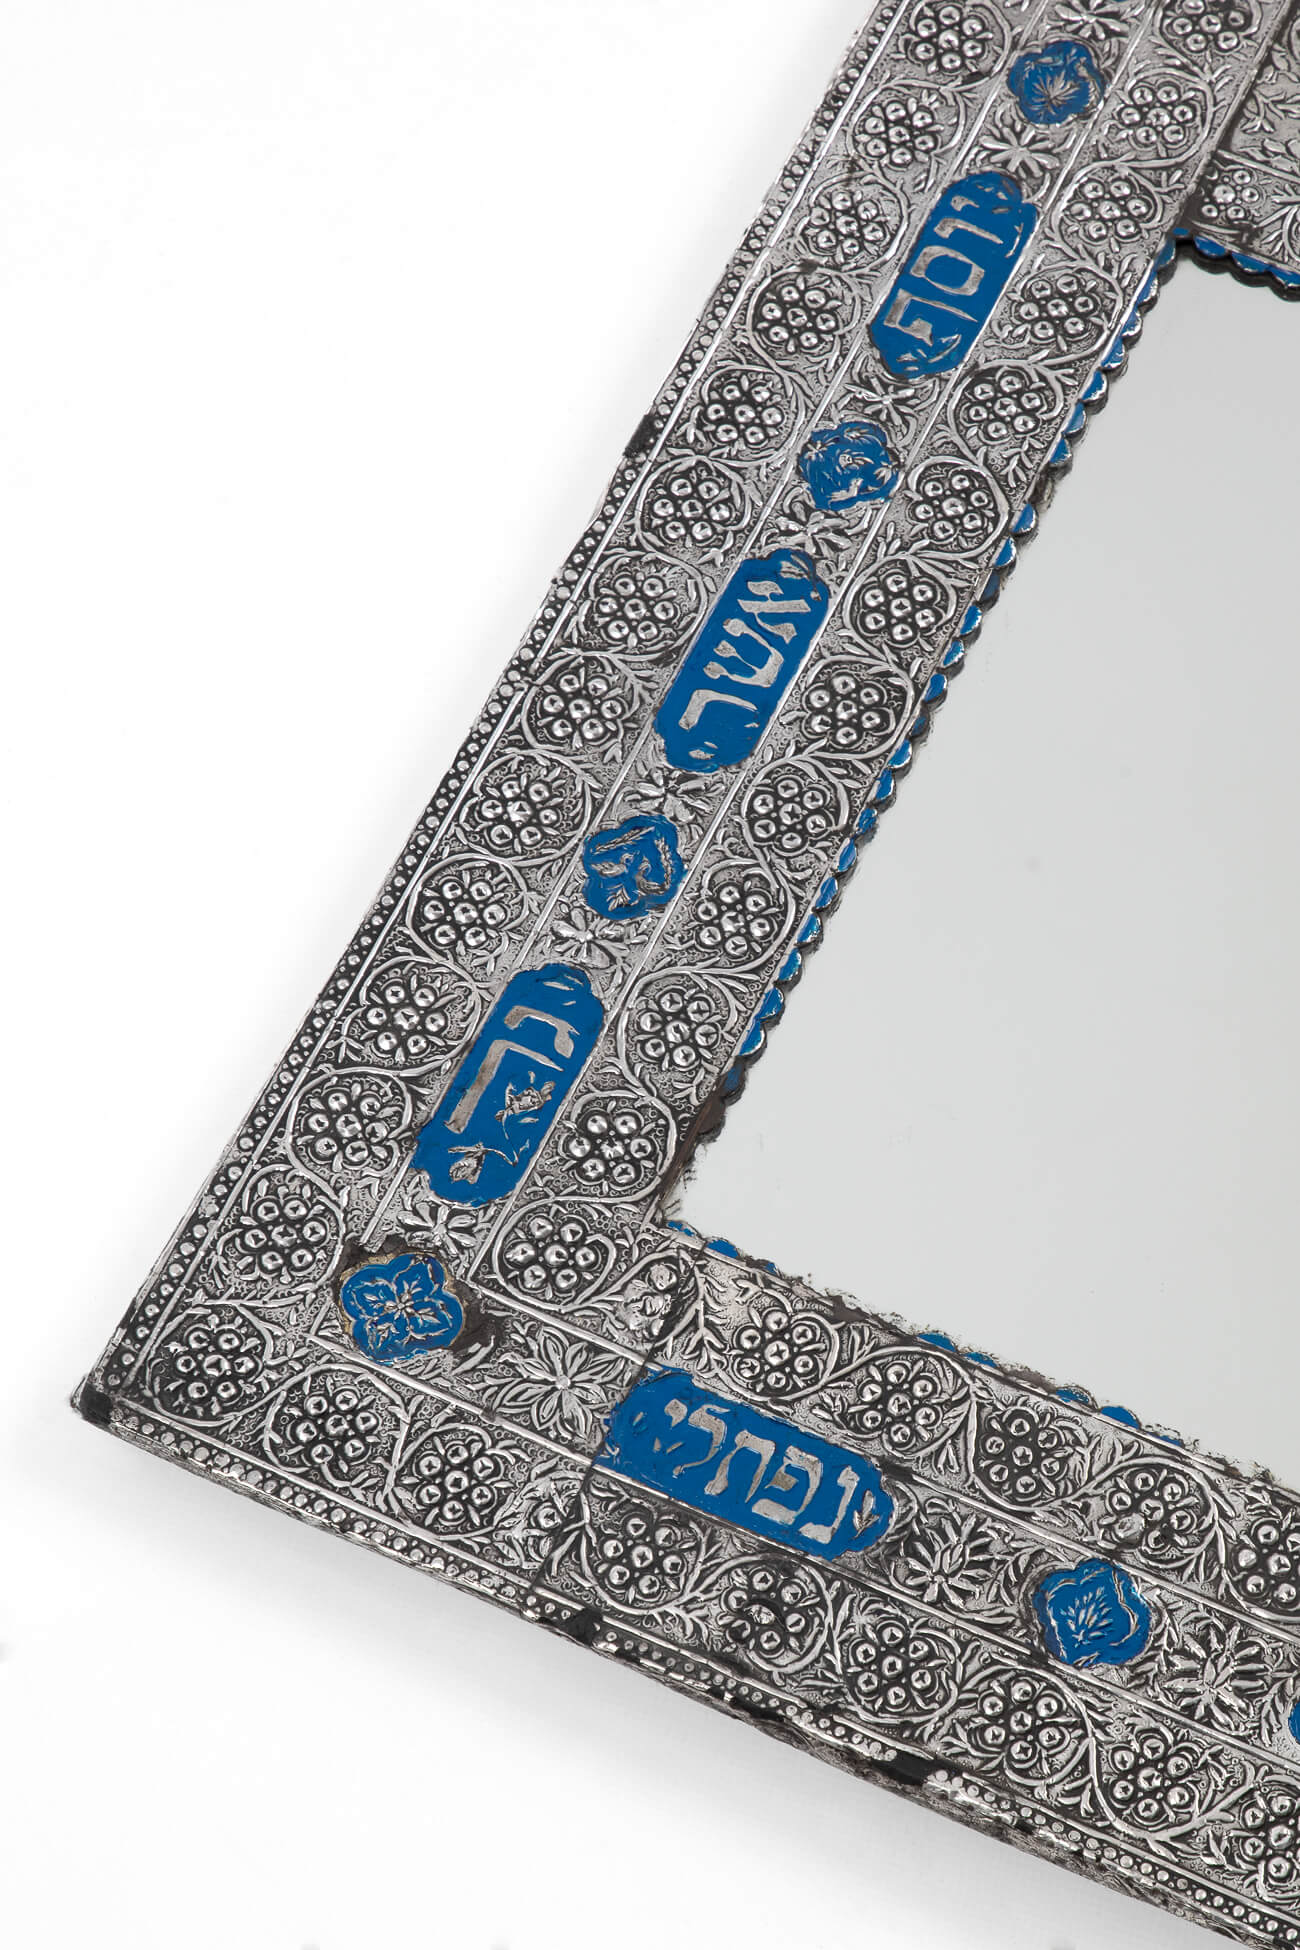 Antique Judaica Mirror in silver and blue with Hebrew inscription